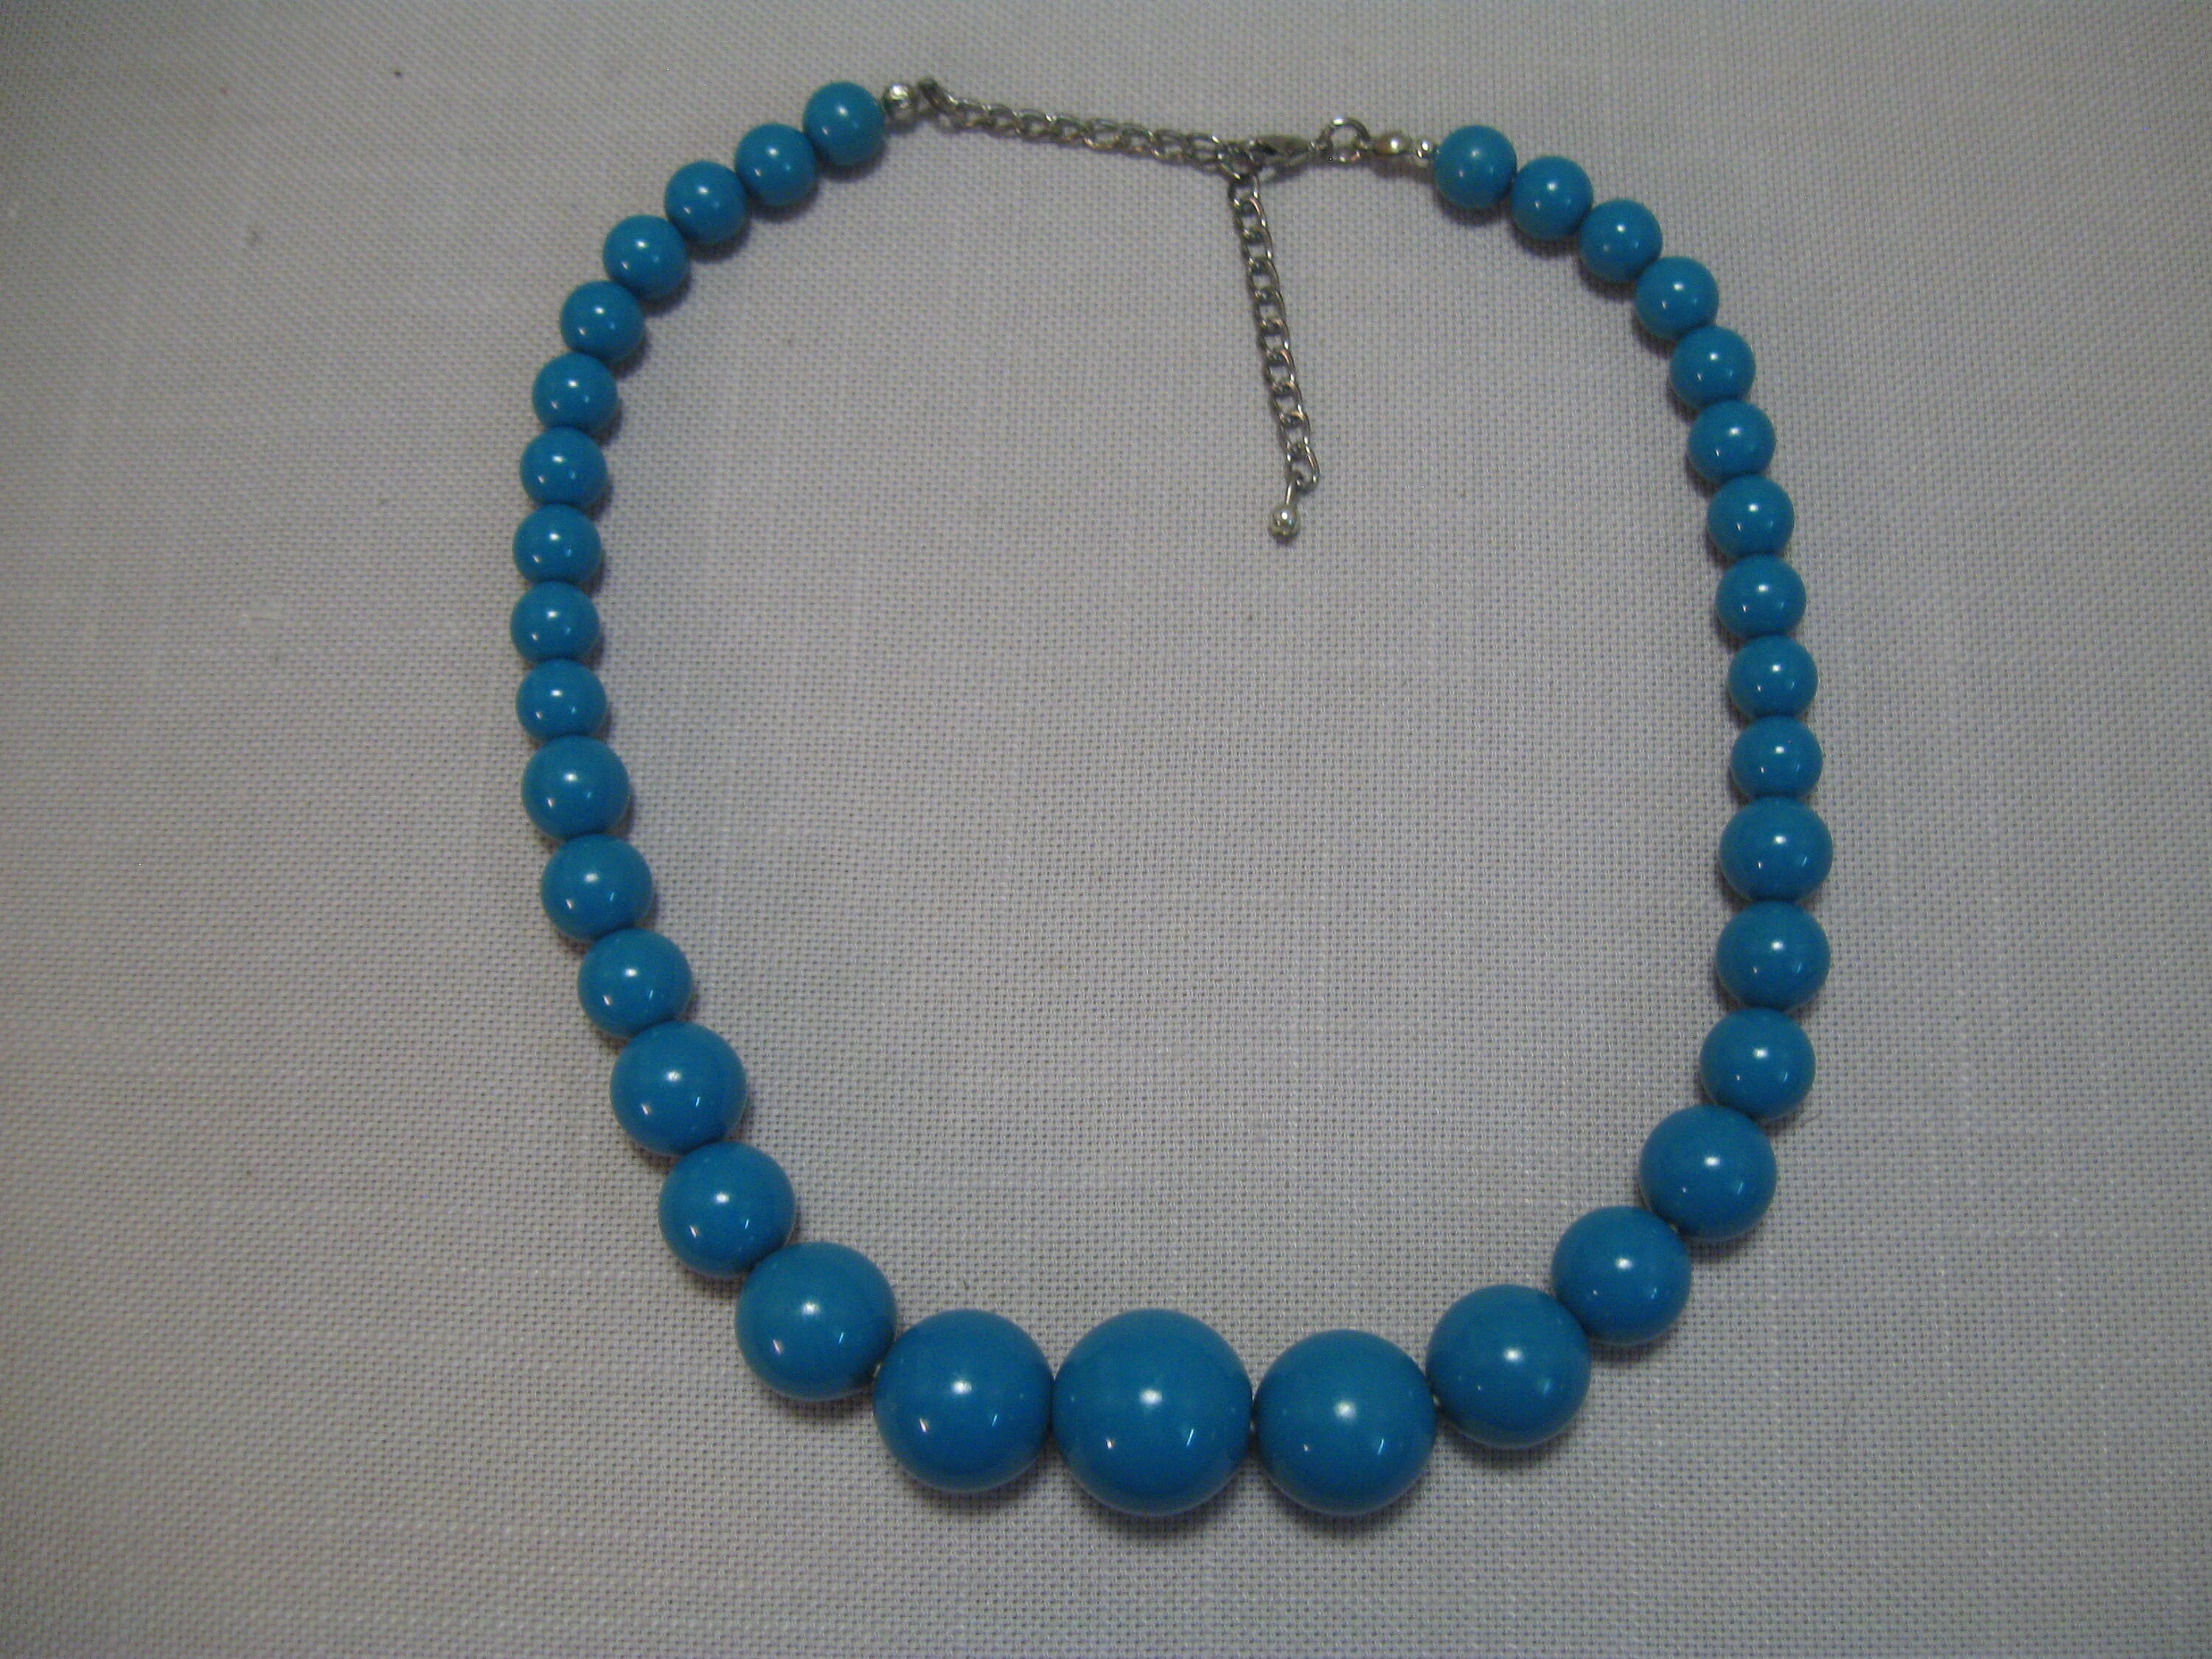 Necklace Choker Bib Graduated Blue Turquoise Beads Silver Tone Chain And Lobster Clasp